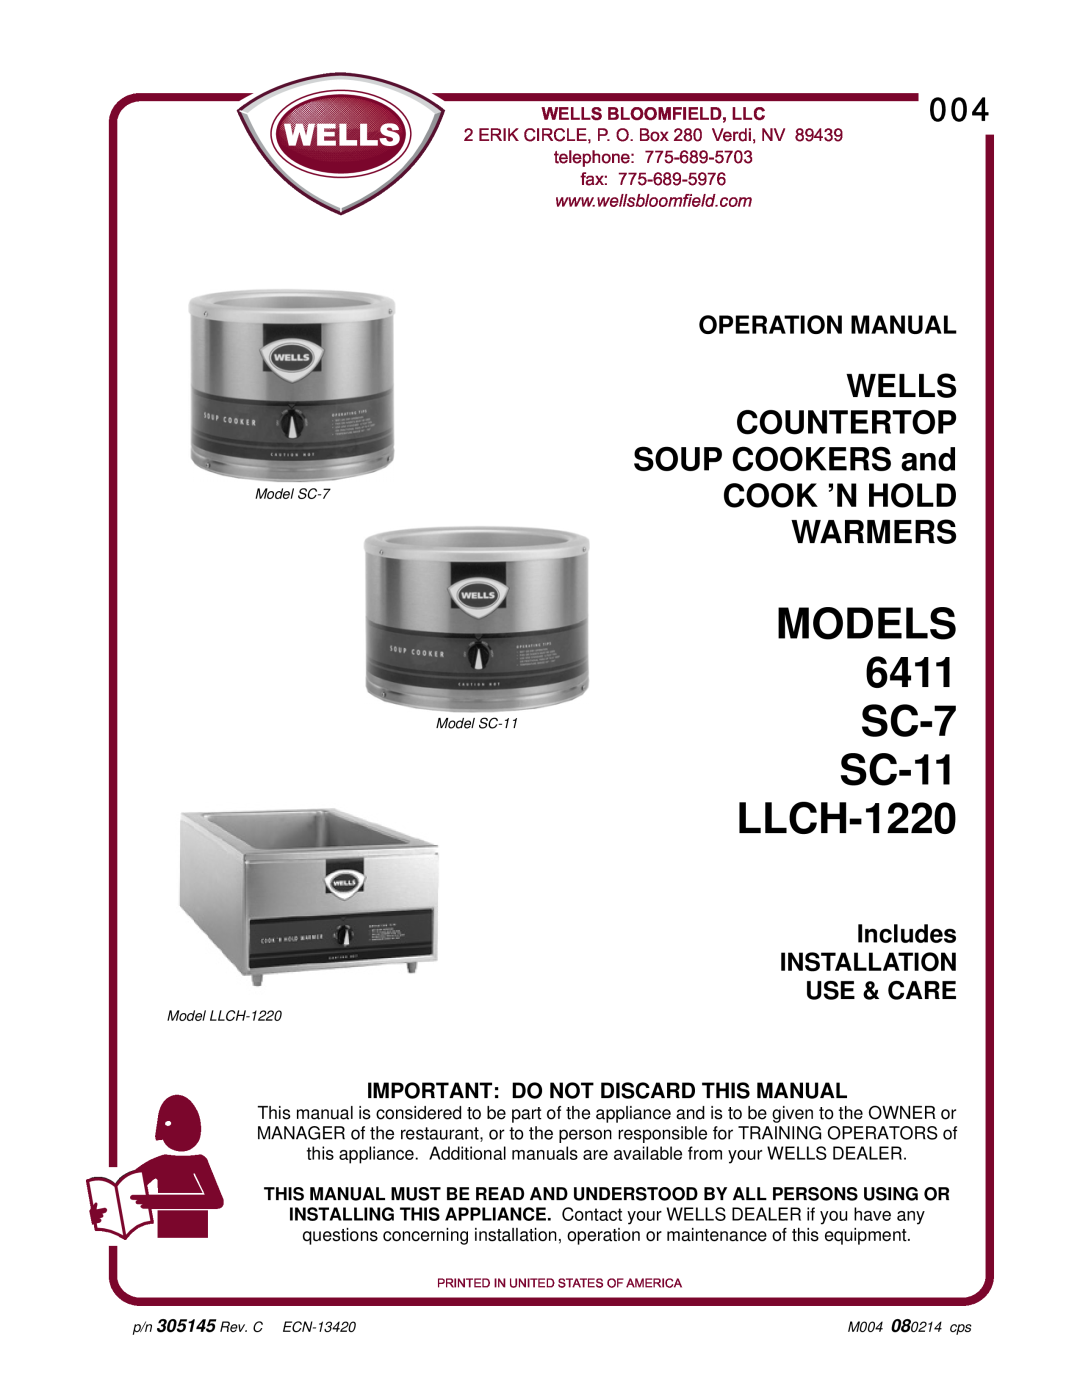 Wells operation manual MODELS 6411 SC-7 SC-11 LLCH-1220, WELLS COUNTERTOP SOUP COOKERS and, Cook ’N Hold Warmers, fax 